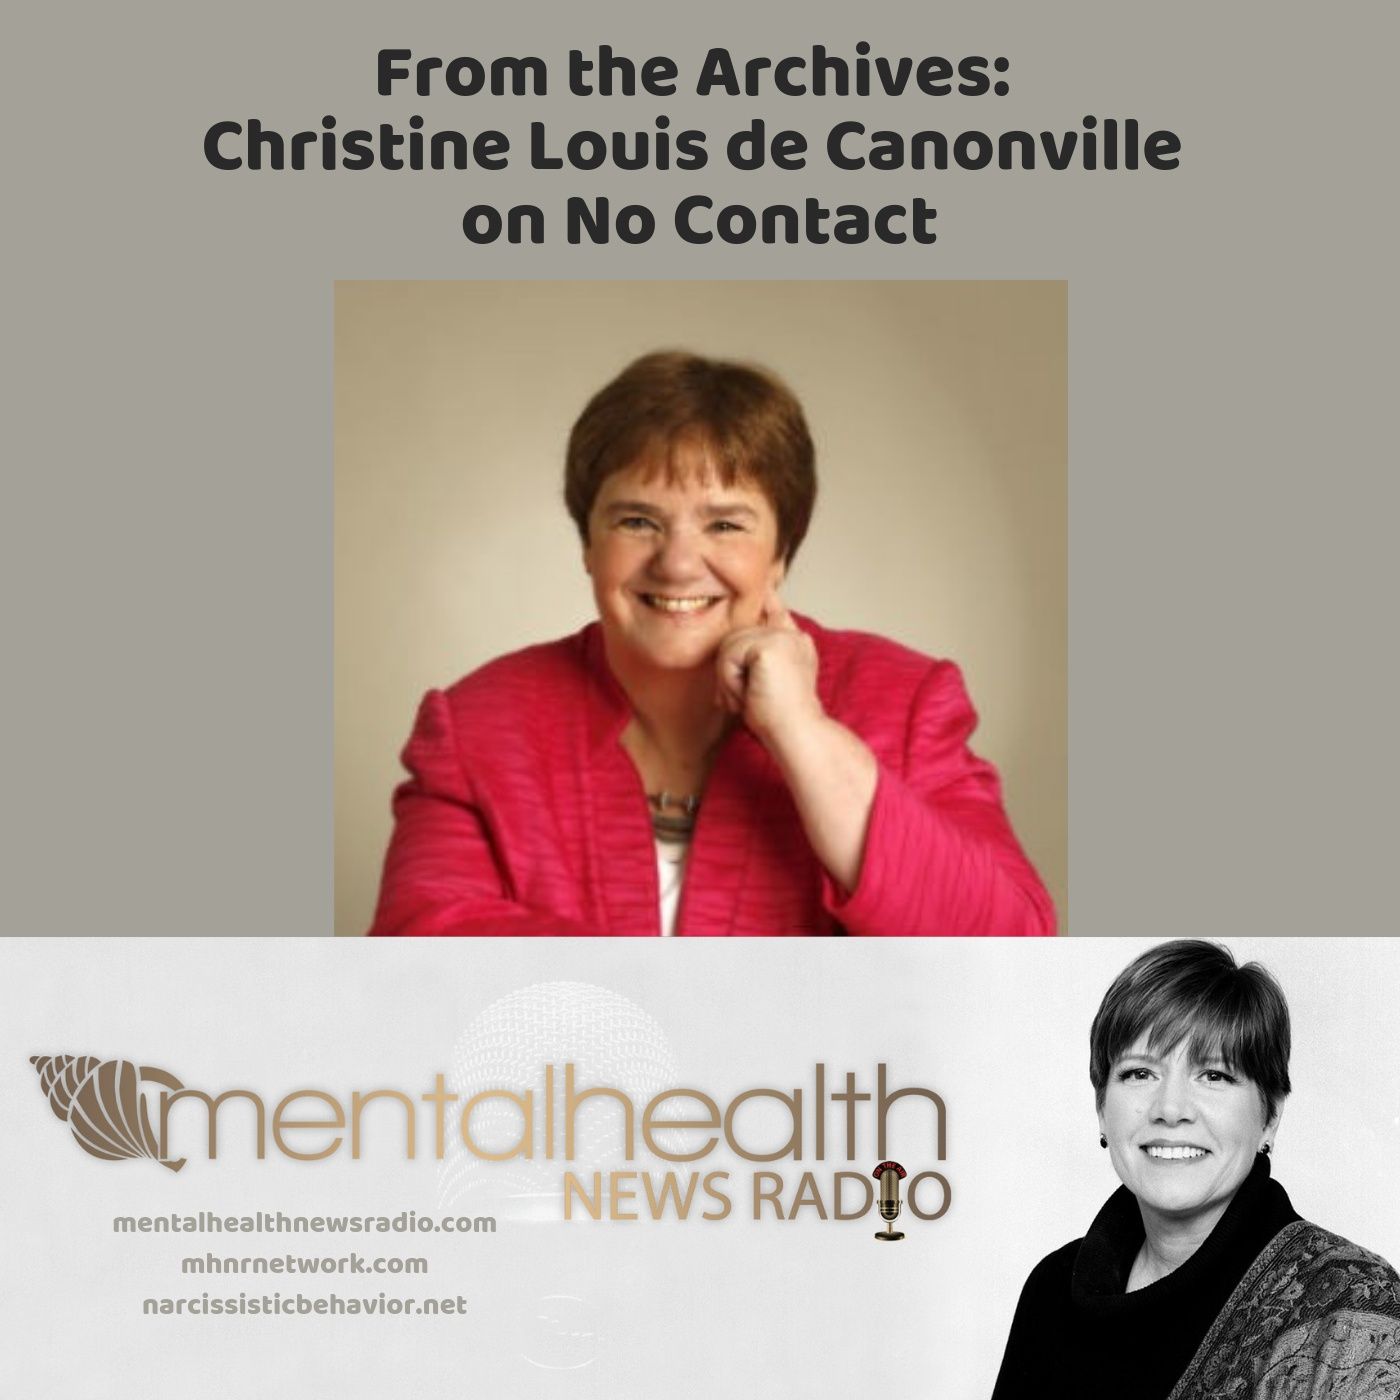 Mental Health News Radio - From the Archives: Christine Louis de Canonville on No Contact